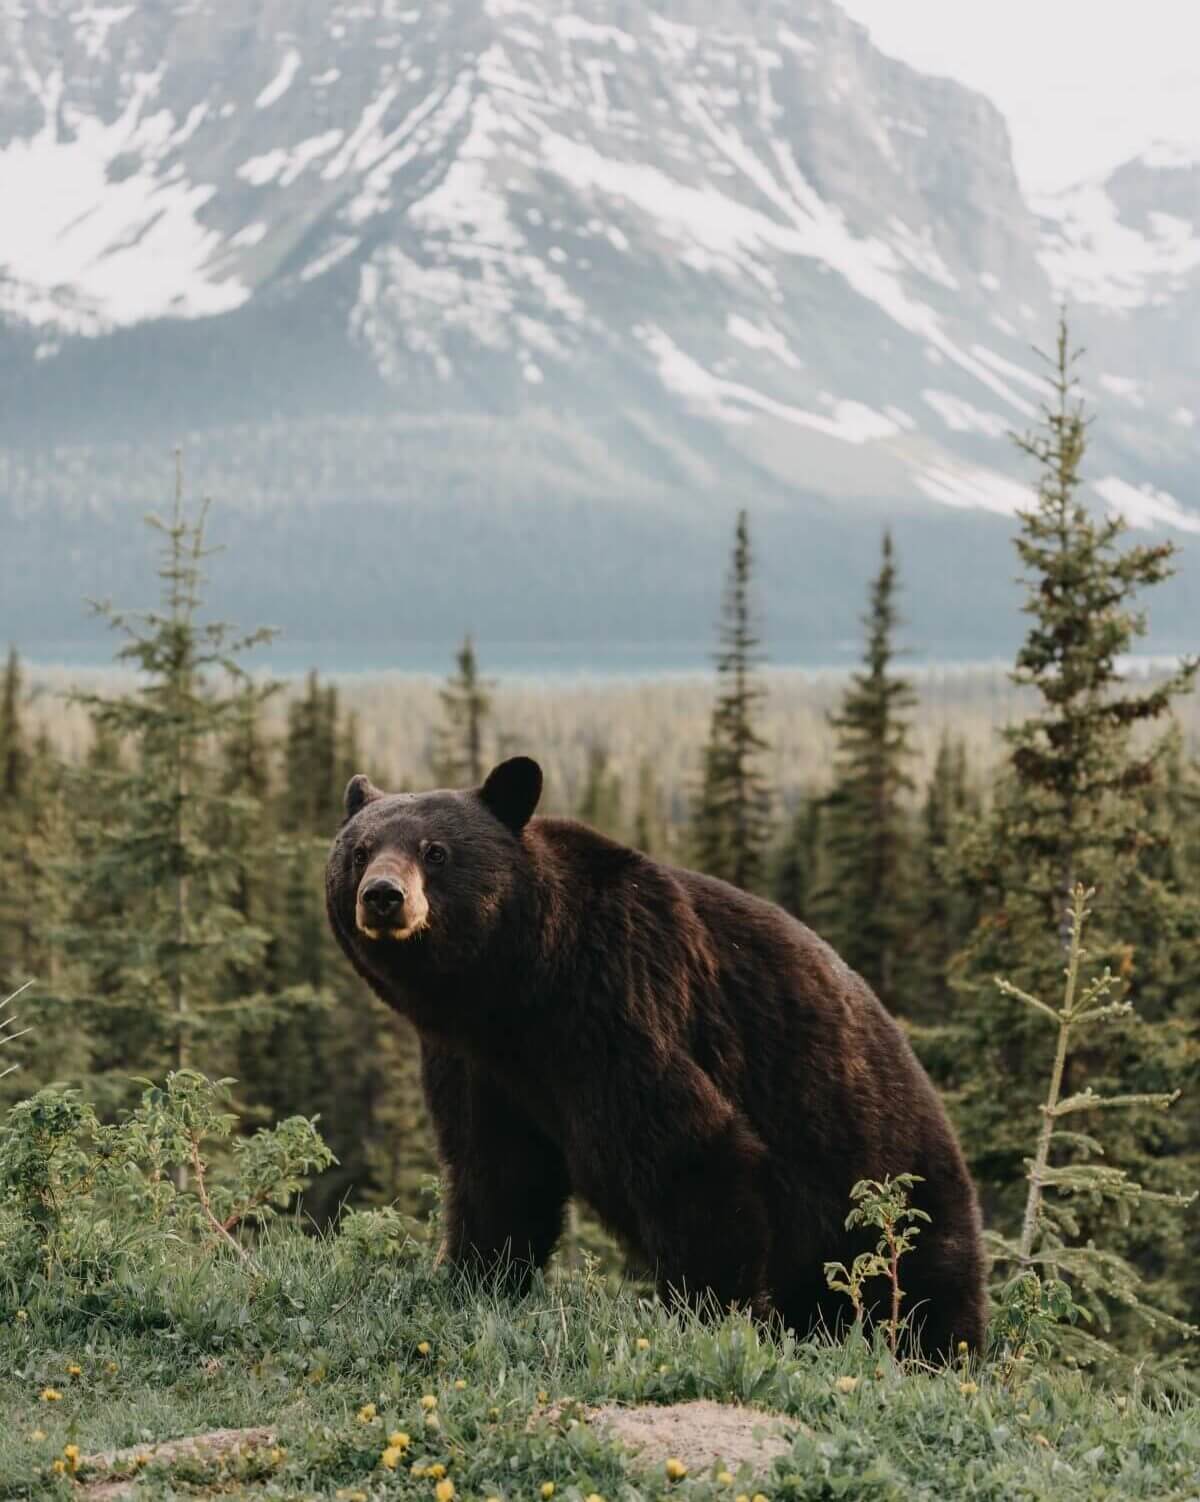 Black bear in the forest with a mountain in the distance